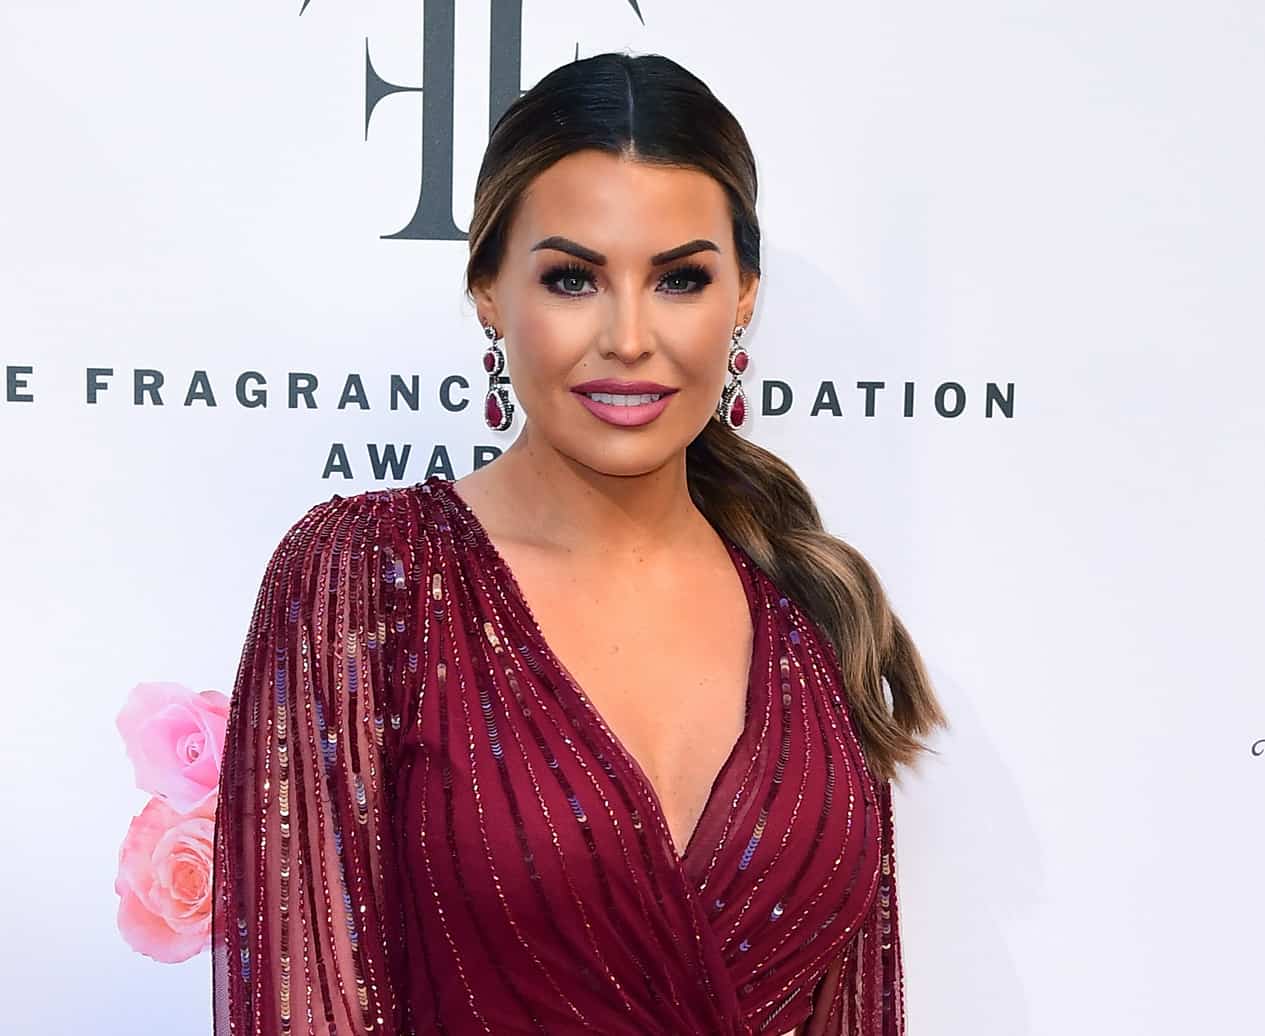 Former Towie star Jess Wright has revealed her hopes are fading for her delayed wedding later this year